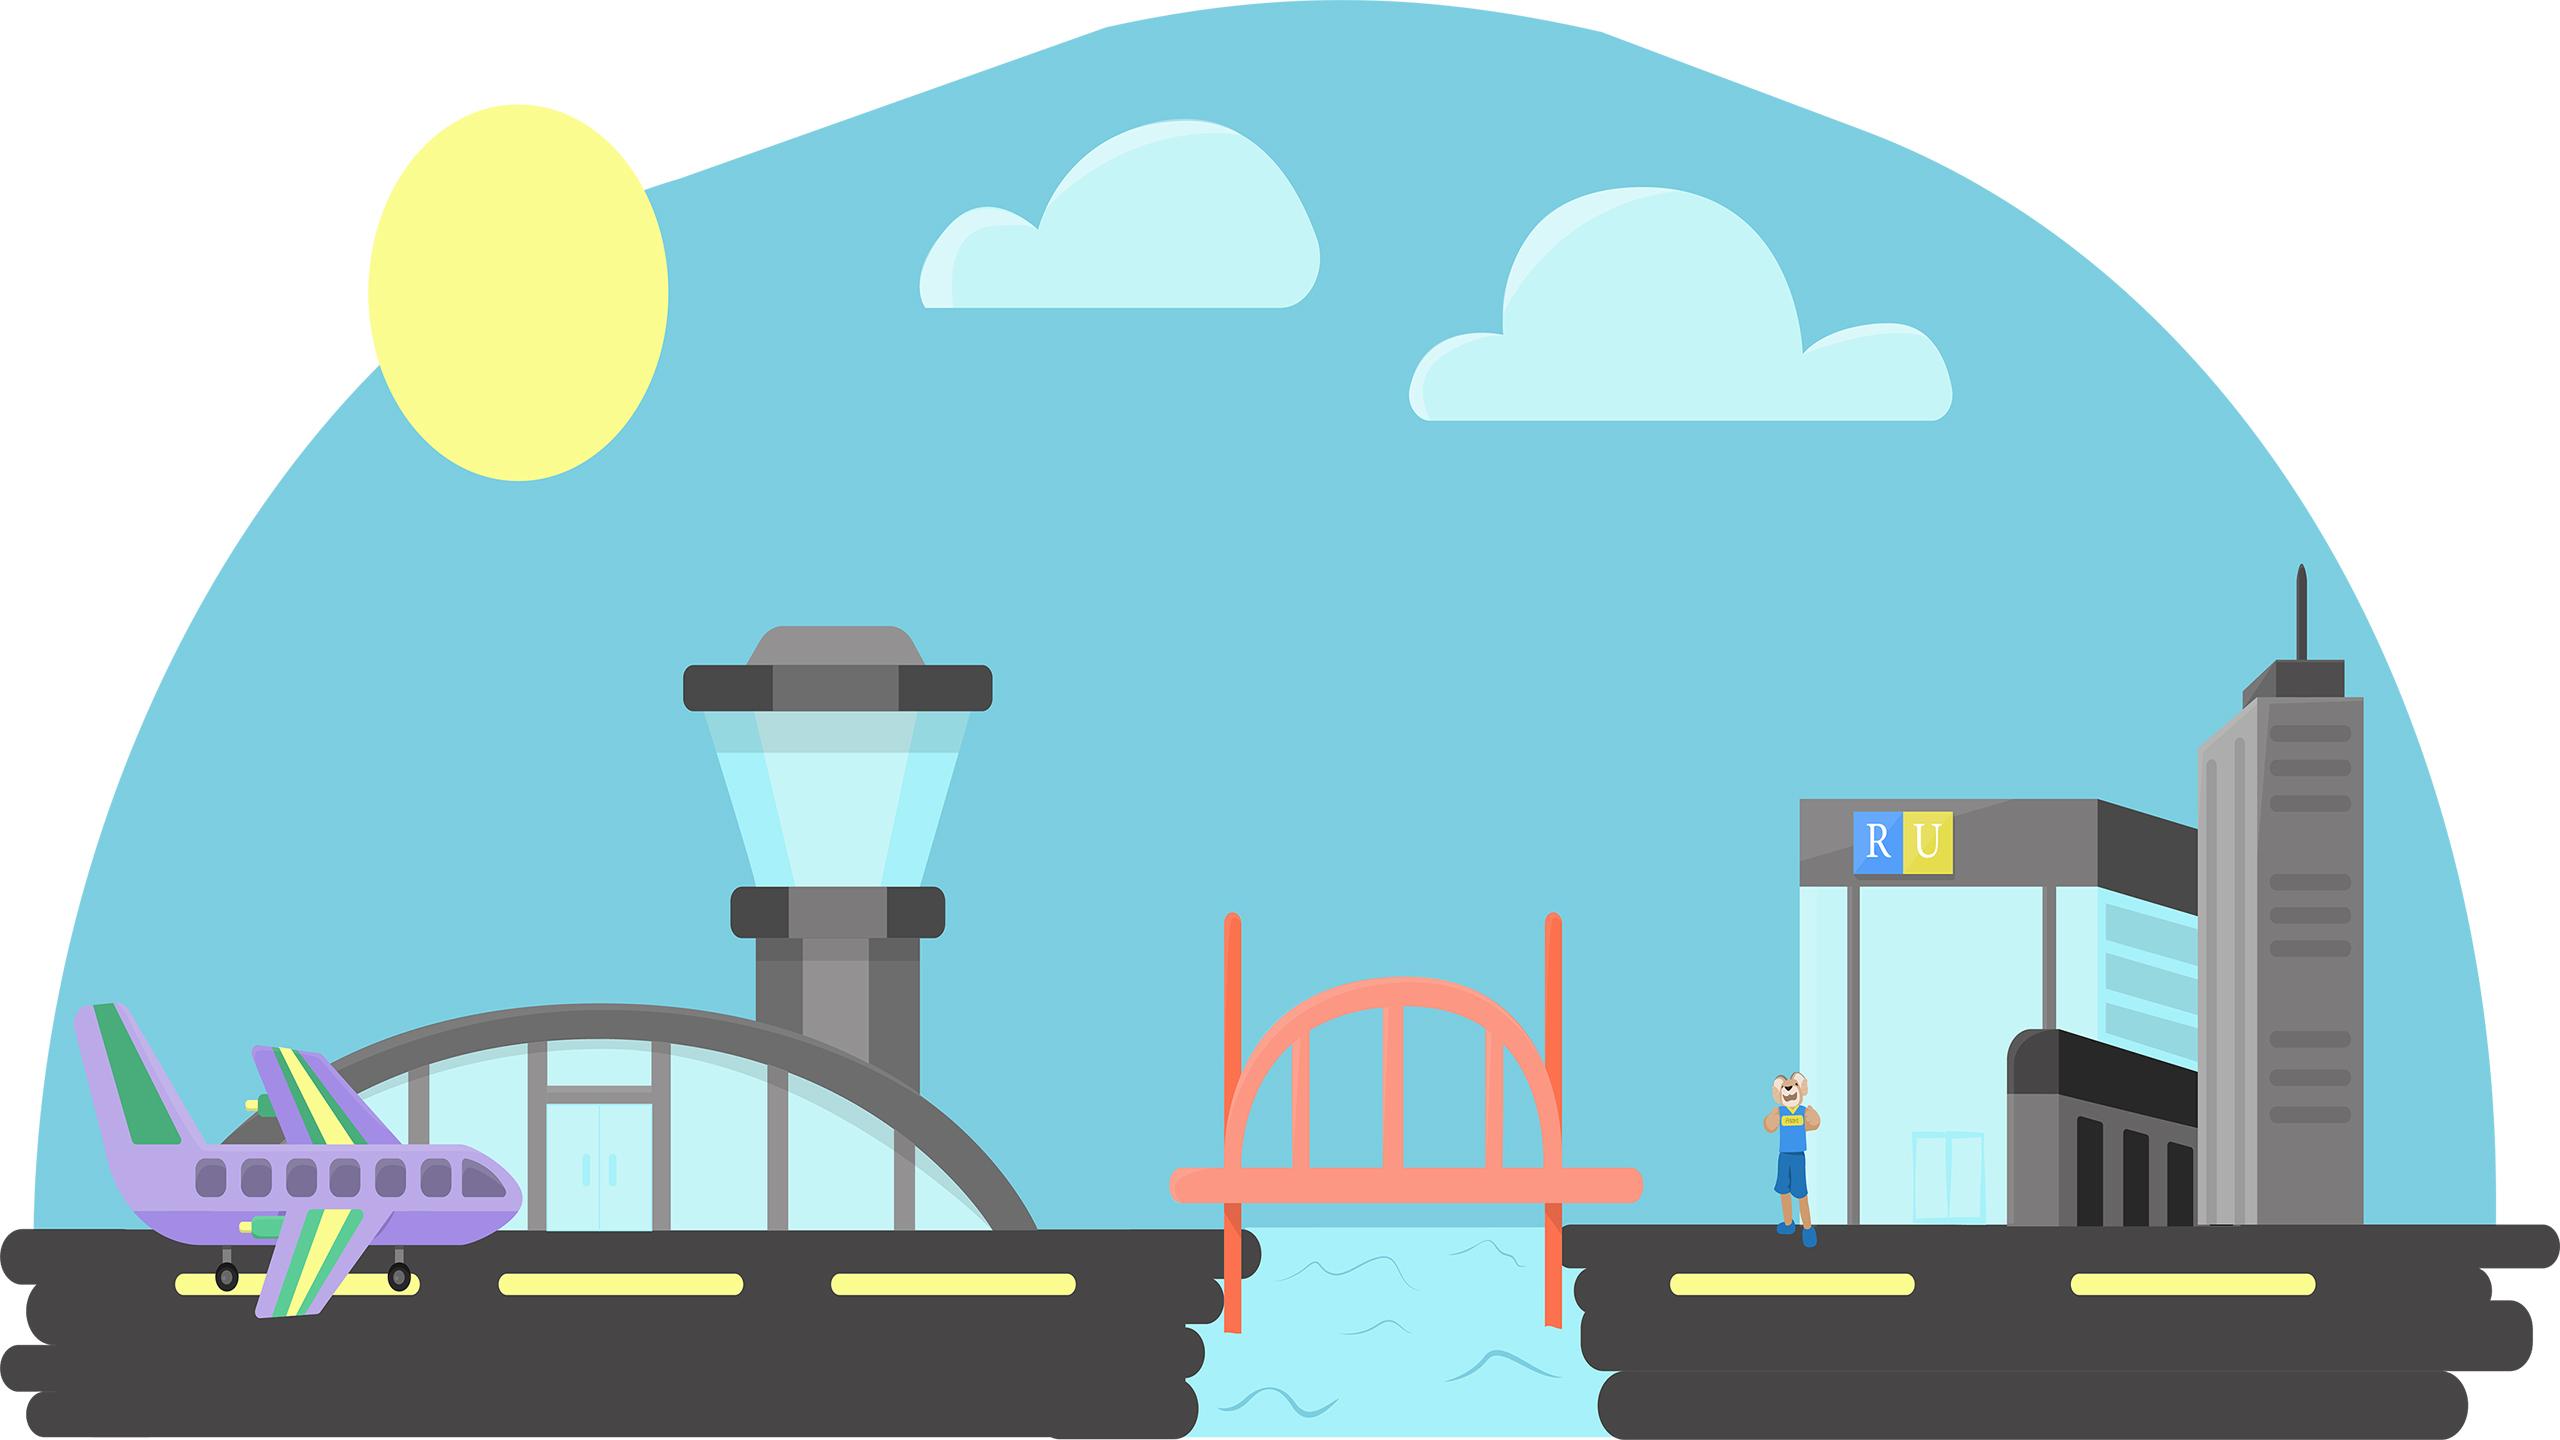 Illustration of bridge over a river. On one side there is an airport with an airplane and on the other there is a Ryerson building with Eggy standing in front of it.